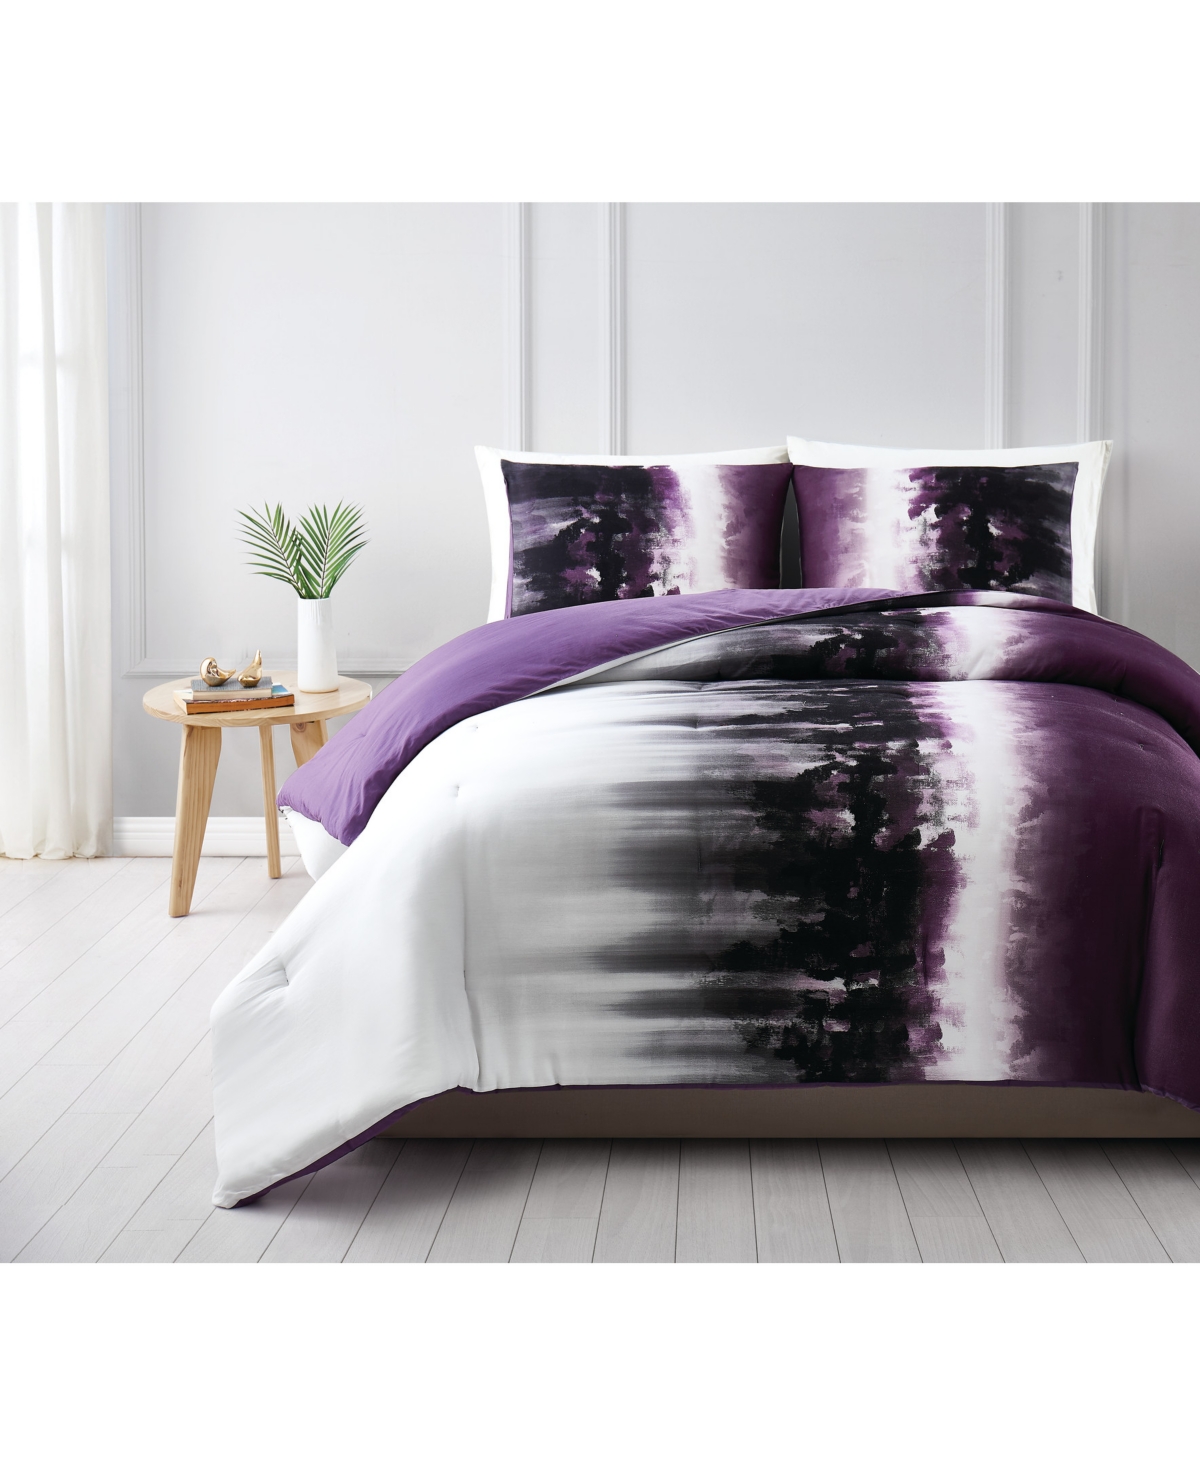 Vince Camuto Home Vince Camuto Mirrea Full/queen Comforter Set In White,purple